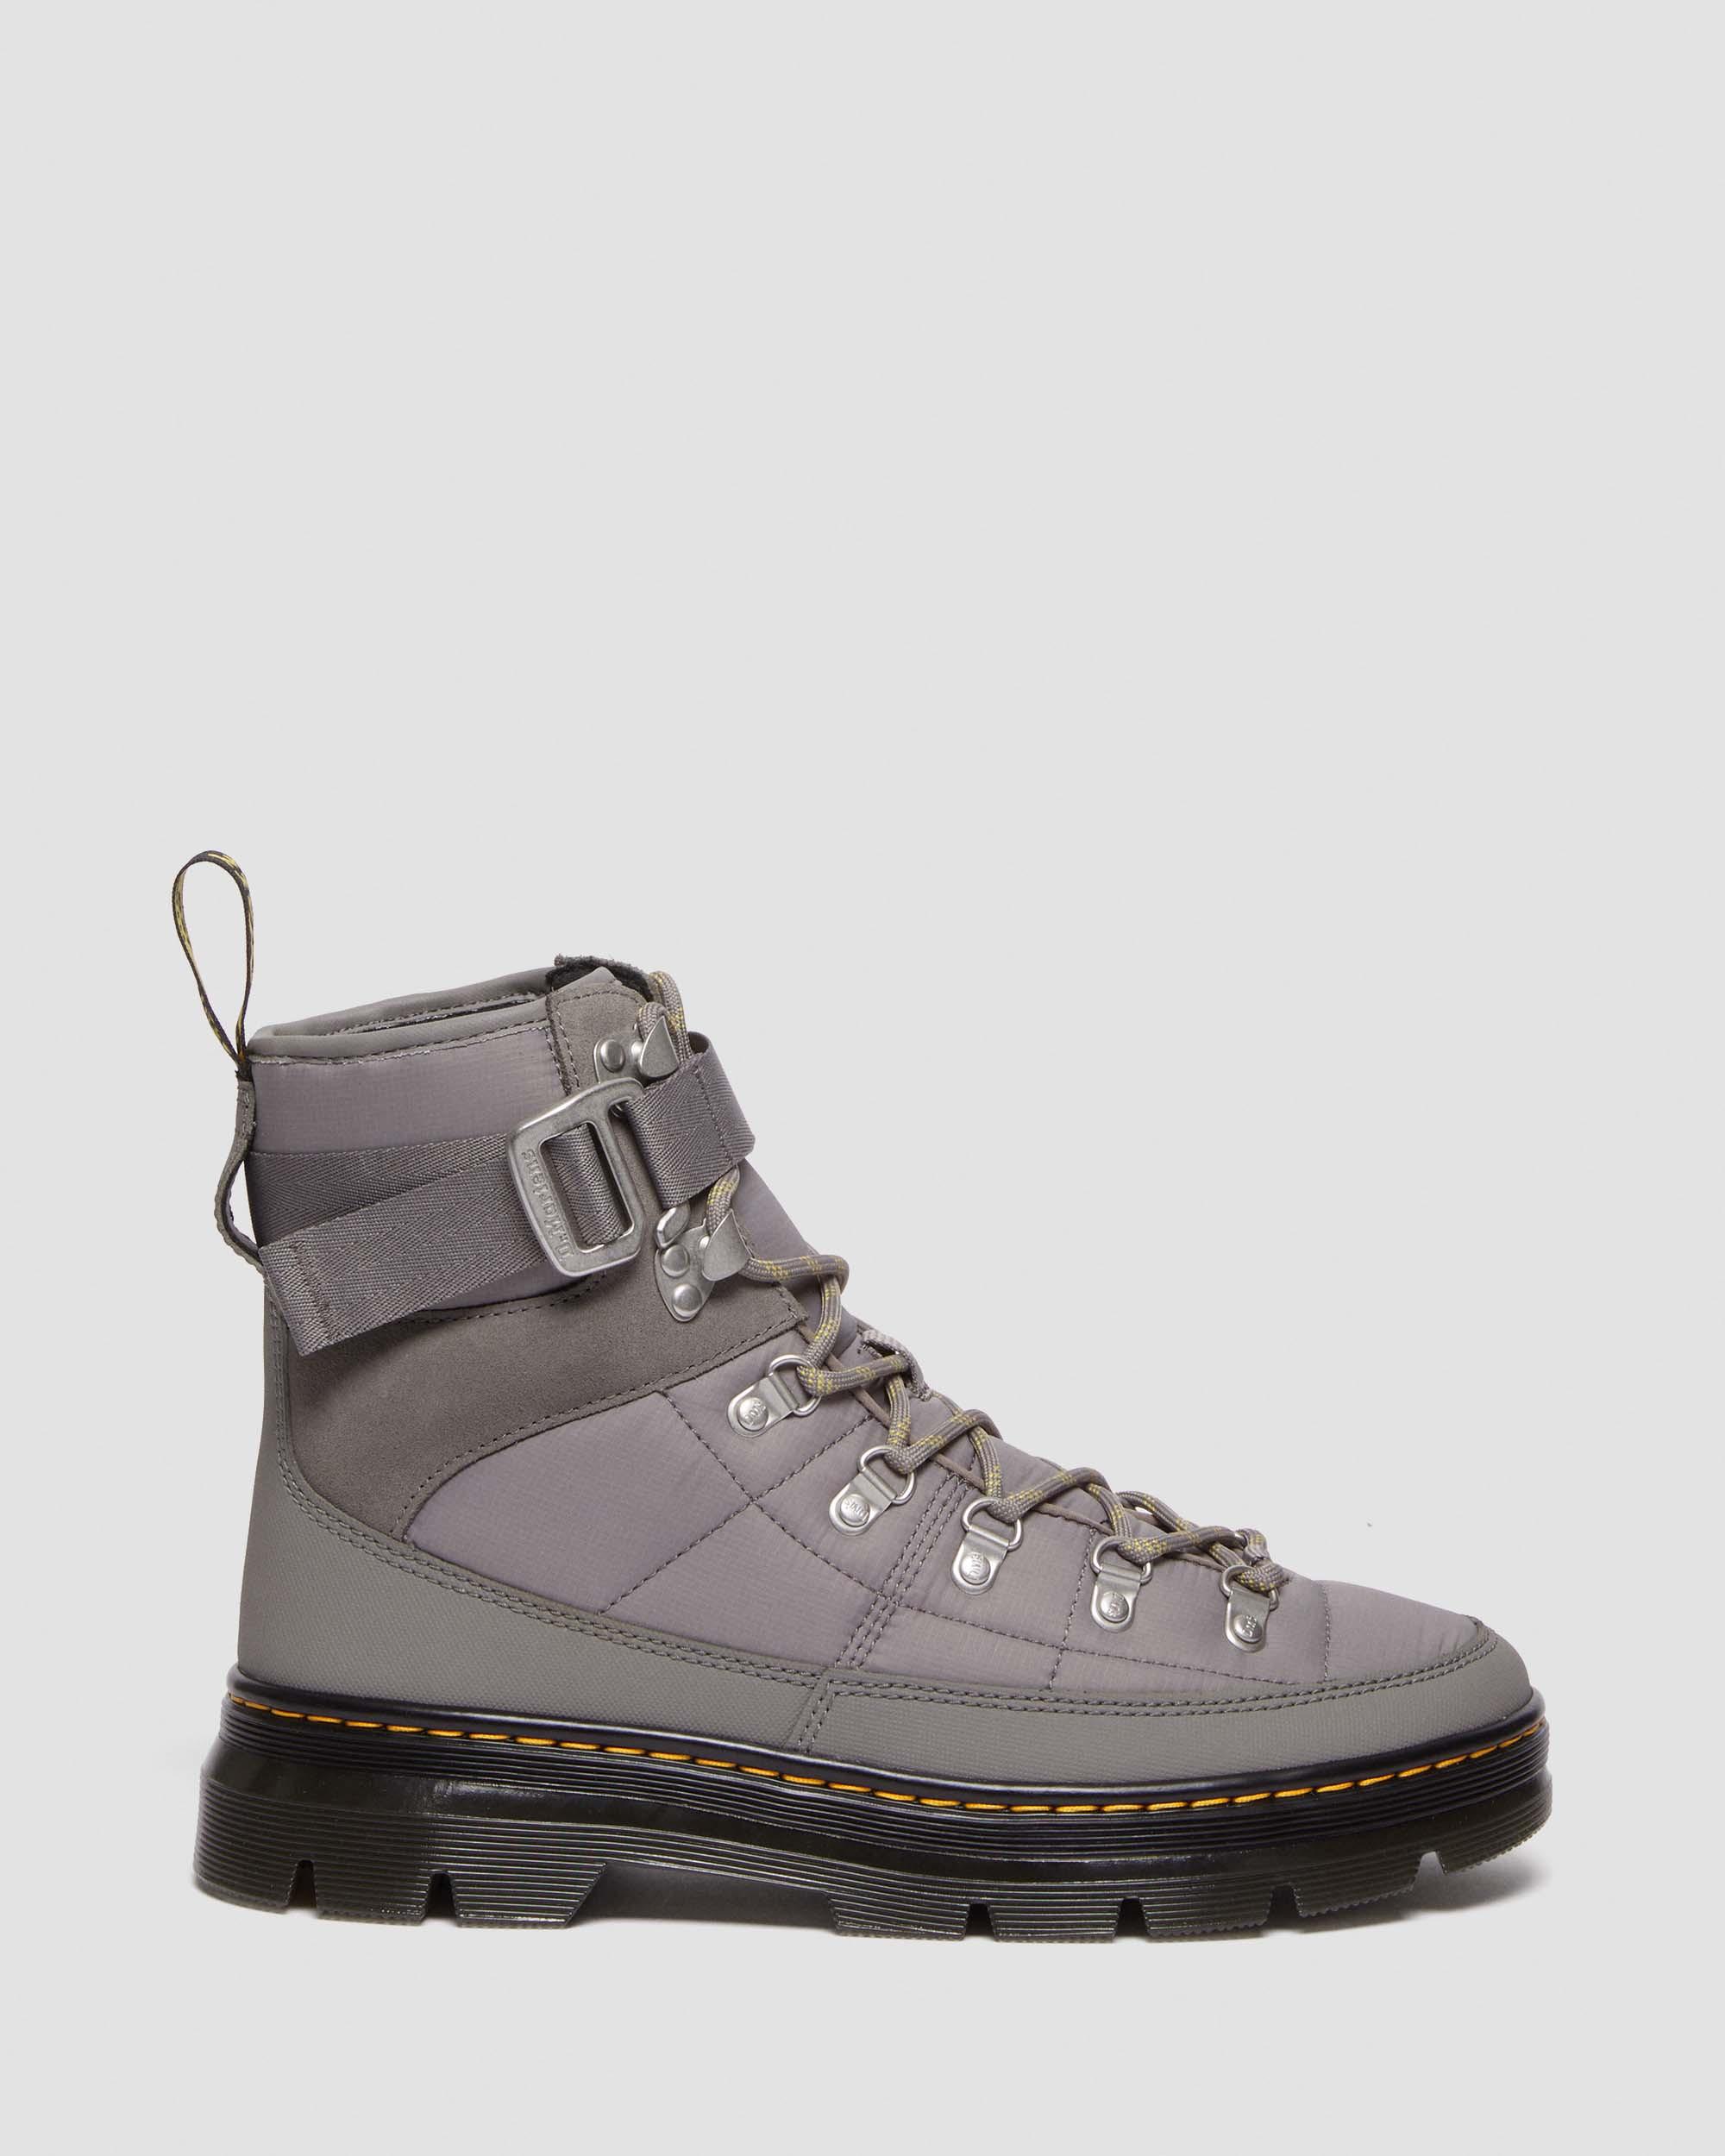 Combs Tech Quilted Casual Boots in NICKEL GREY